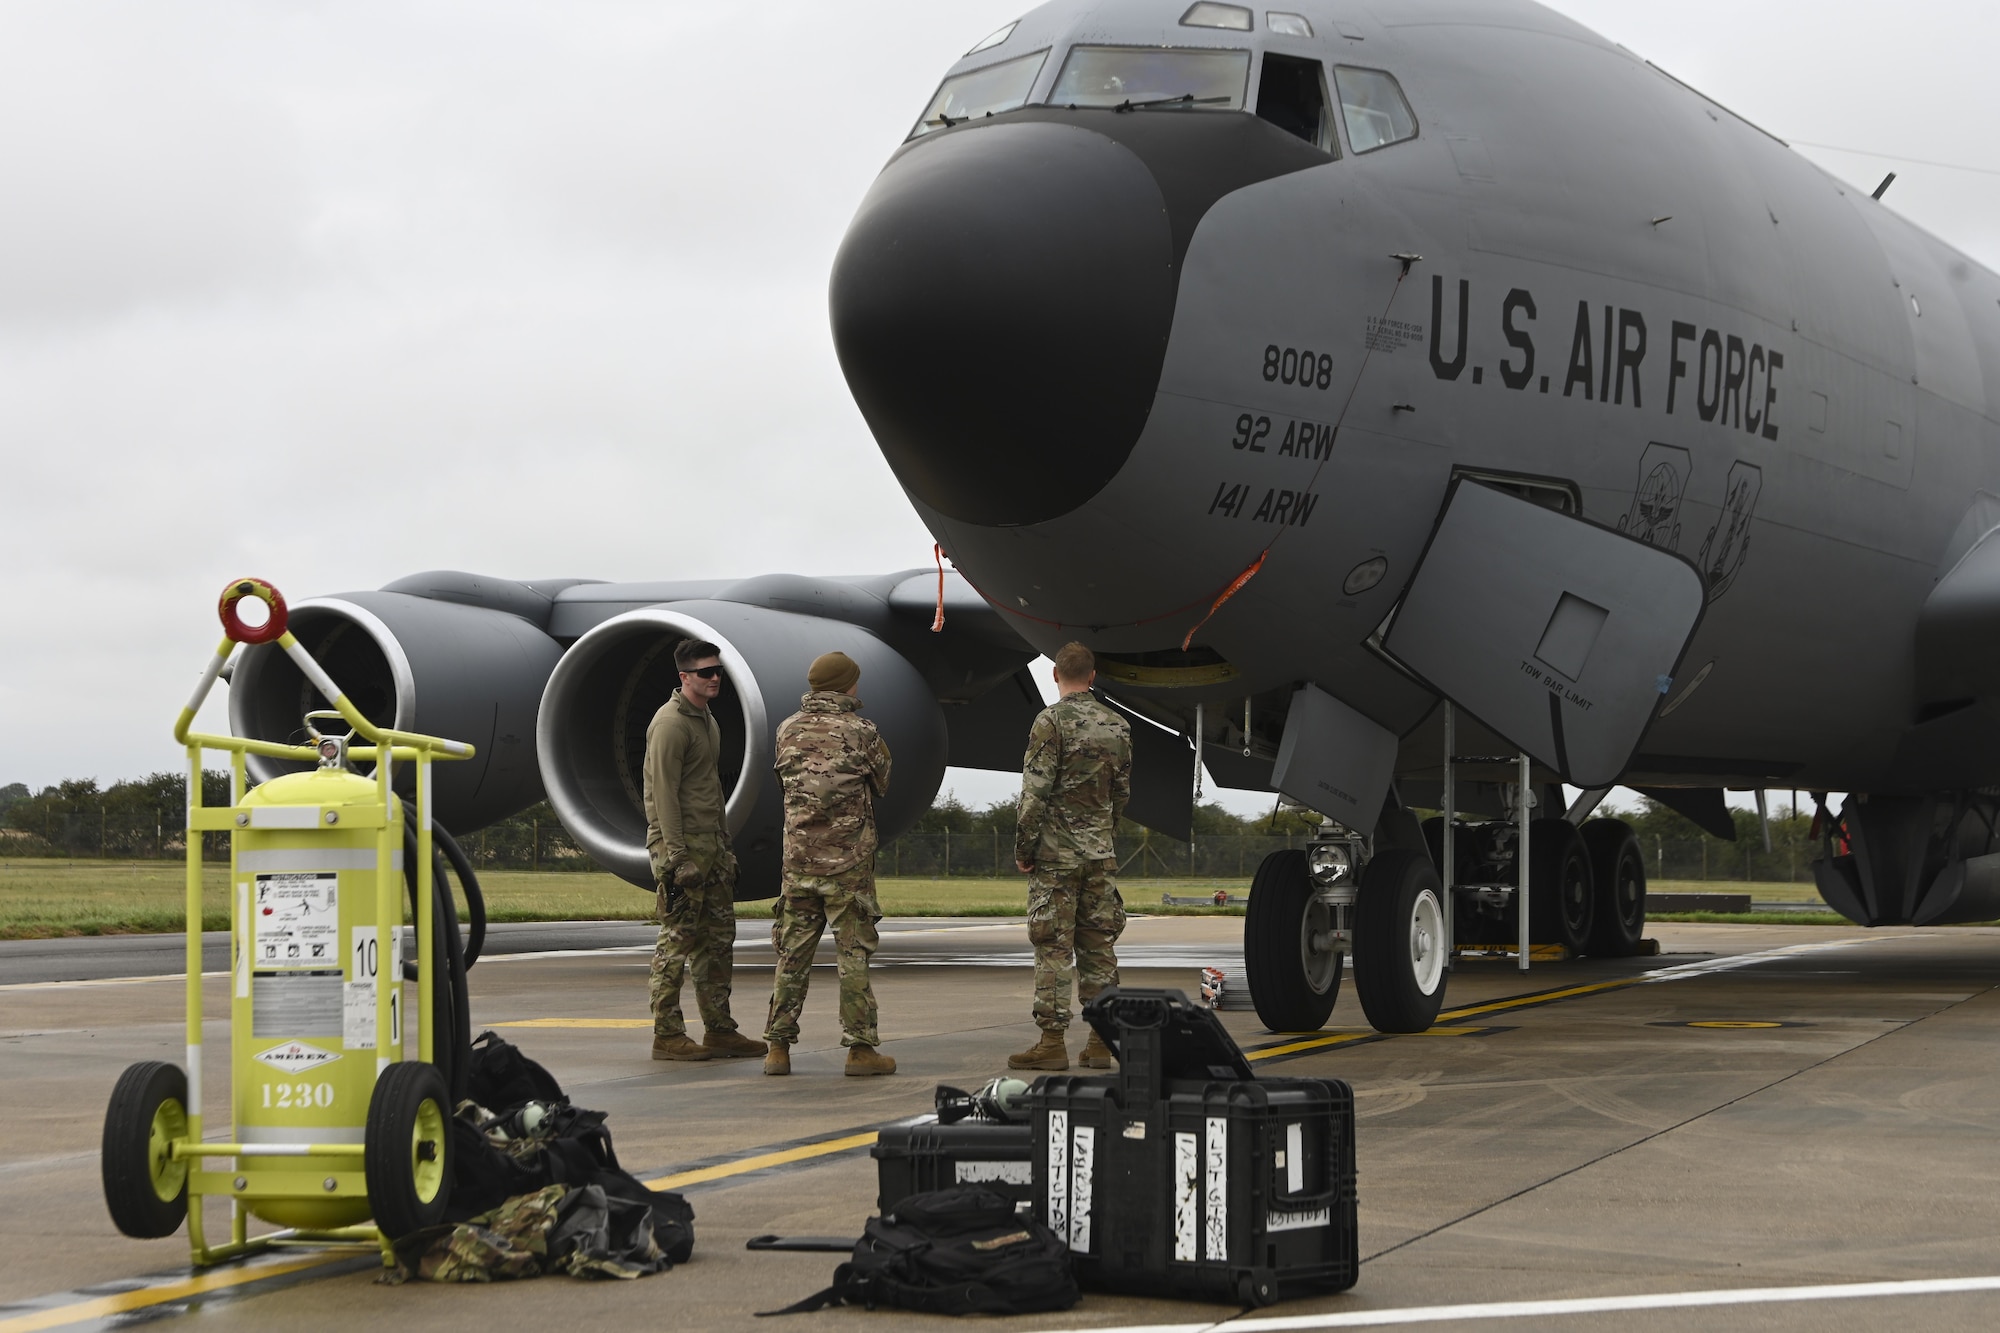 U.S. Airmen assigned to the 100th Aircraft Maintenance Squadron discuss post-flight maintenance for a KC-135 Stratotanker aircraft at Royal Air Force Mildenhall, England, Aug. 31, 2021. The 100th AMXS supports mission readiness by maintaining KC-135s, which provide the critical air refueling “bridge” allowing the expeditionary Air Force to deploy around the globe at a moment’s notice. (U.S. Air Force photo by Senior Airman Joseph Barron)